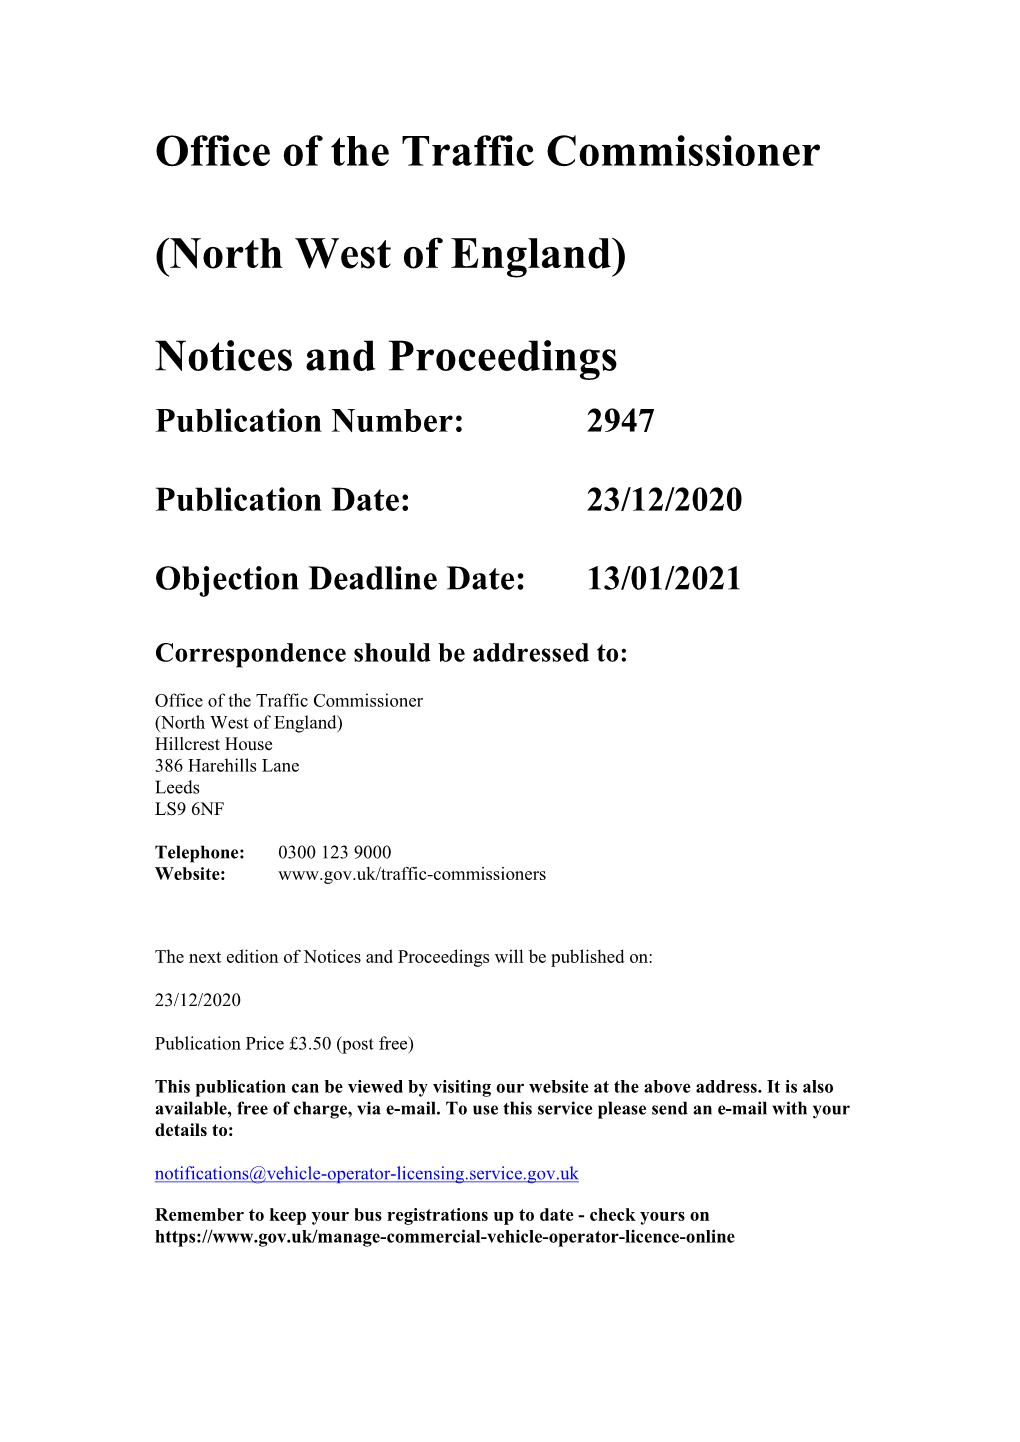 Notices and Proceedings for the North West of England 2947